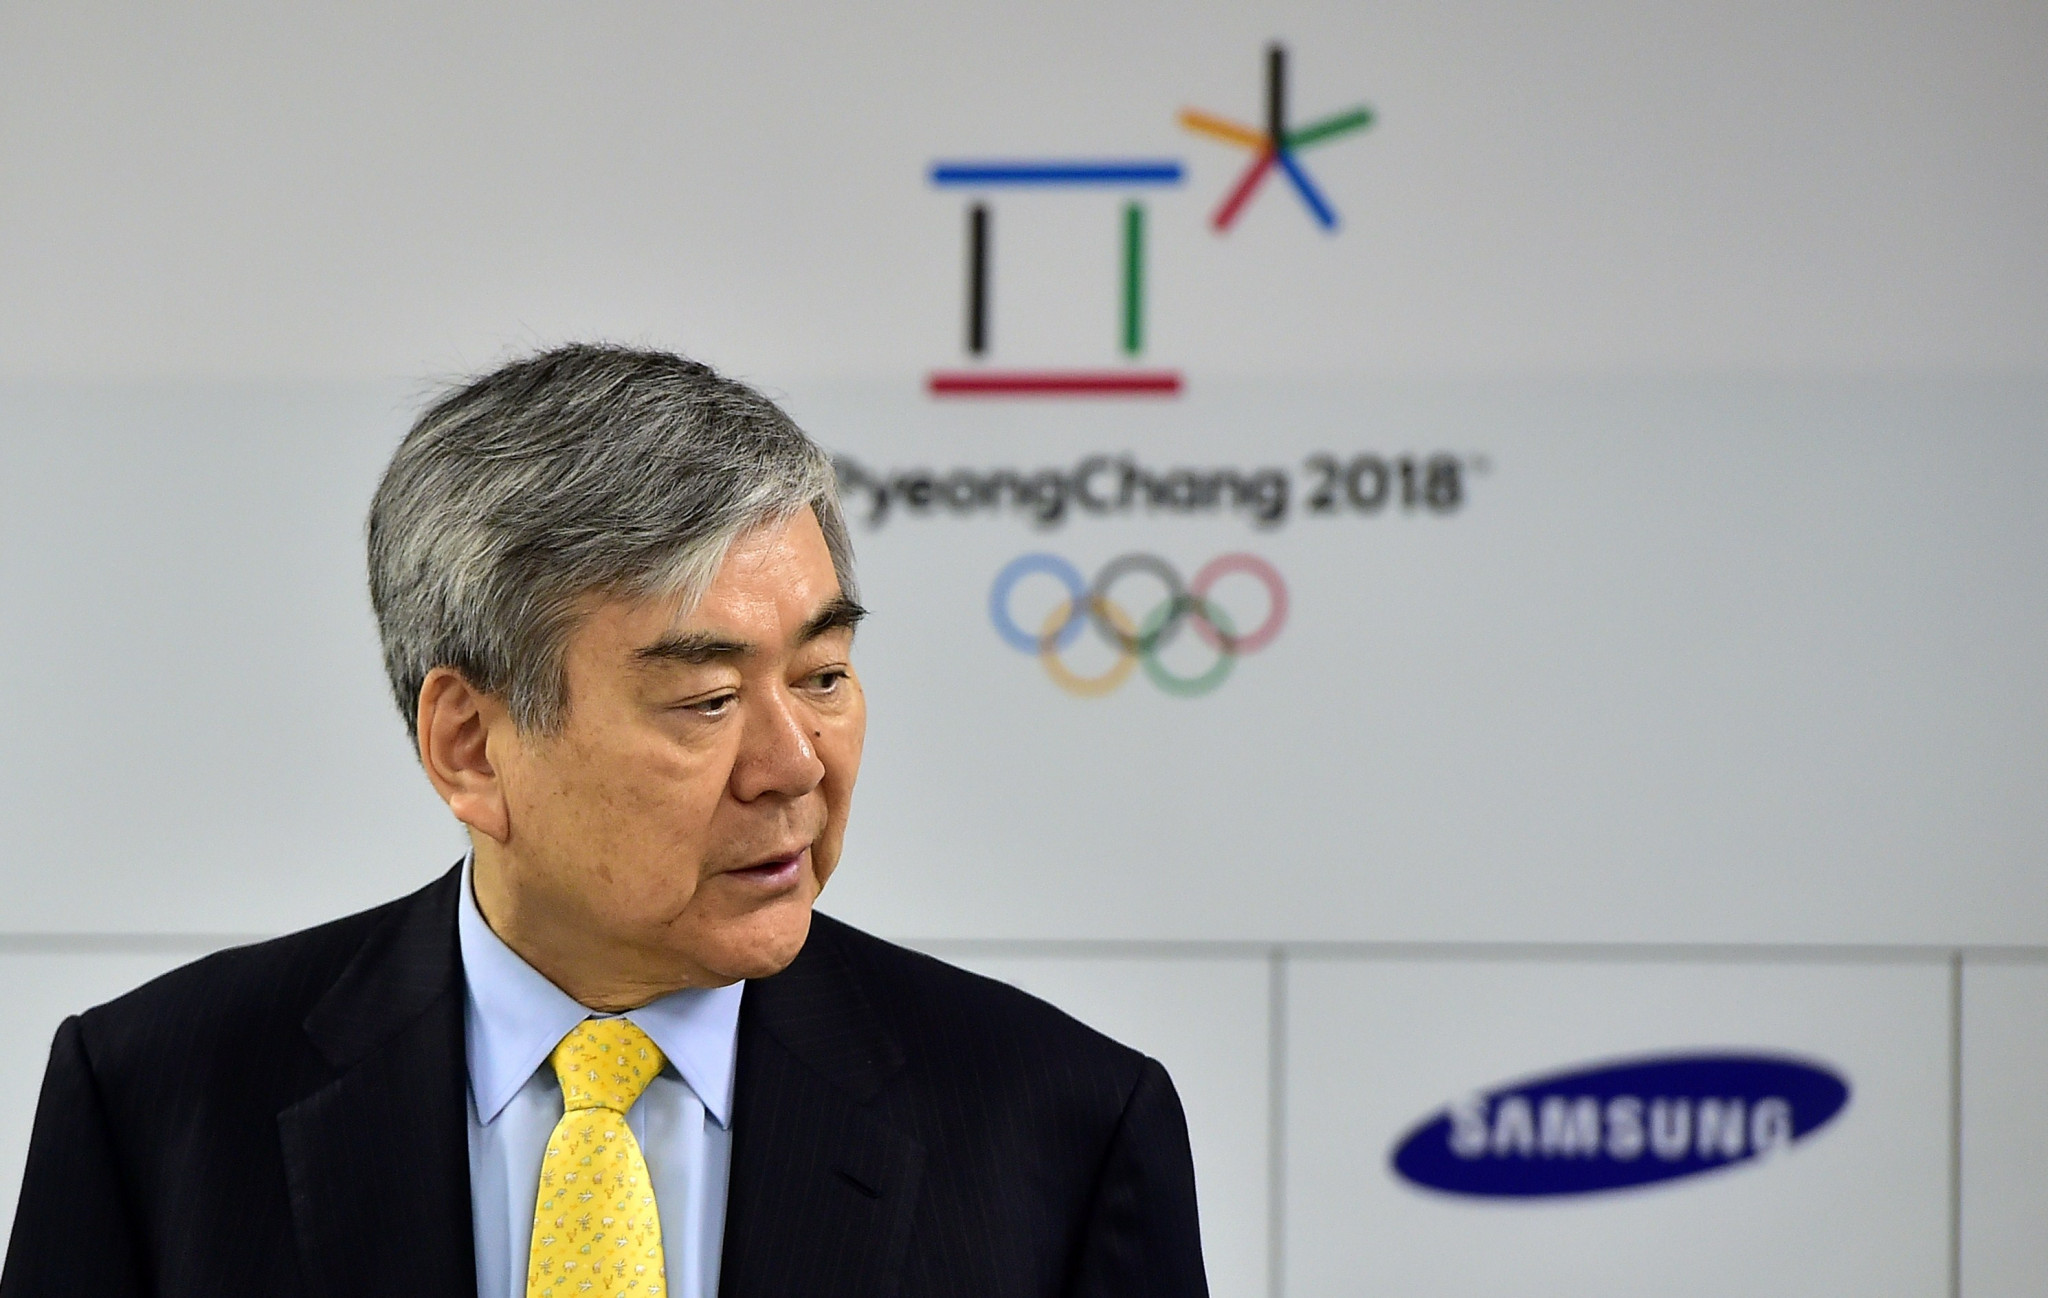 Cho Yang-Ho was forced out as President of Pyeongchang 2018 last year by Vice Sports Minister Kim Chong ©Getty Images